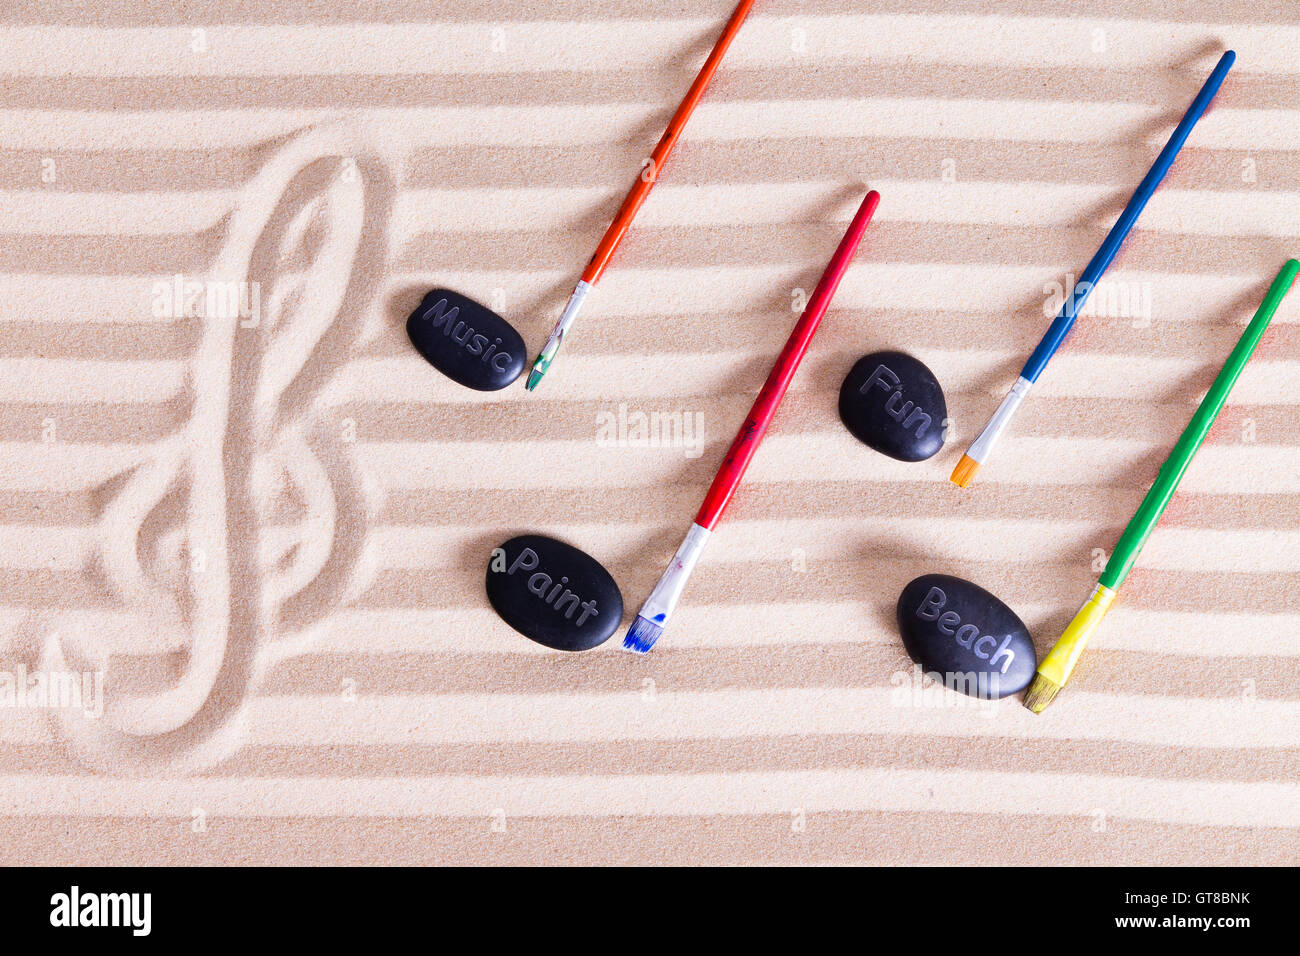 Music, Paint and Fun at the Beach for Resort Activities, G clef at the left  music notes made out of colorful paint brushes and b Stock Photo - Alamy